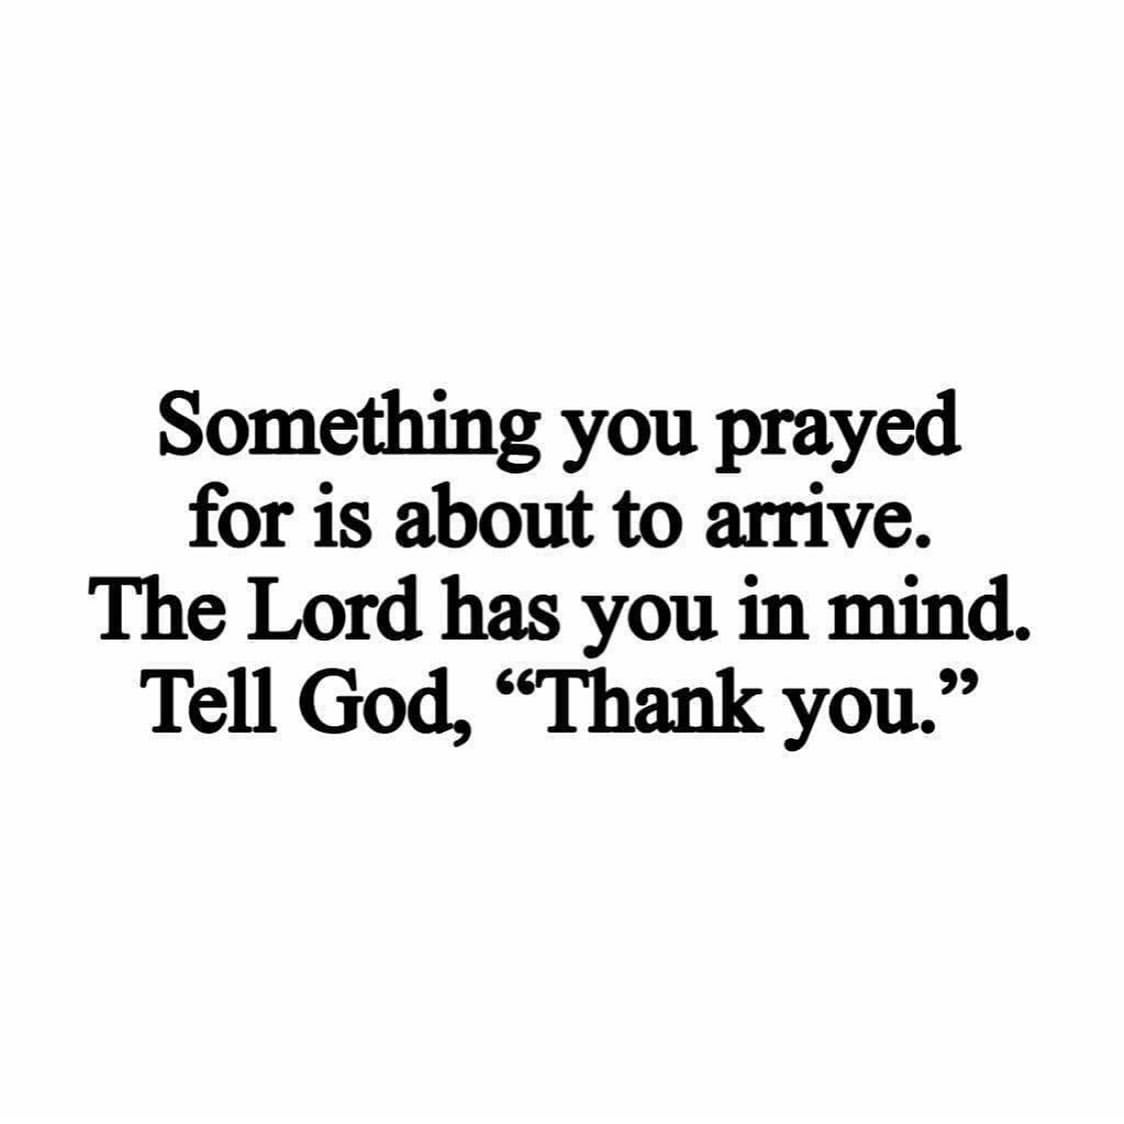 Something you prayed for is about to arrive. The Lord has you in mind. Tell God, "Thank you."